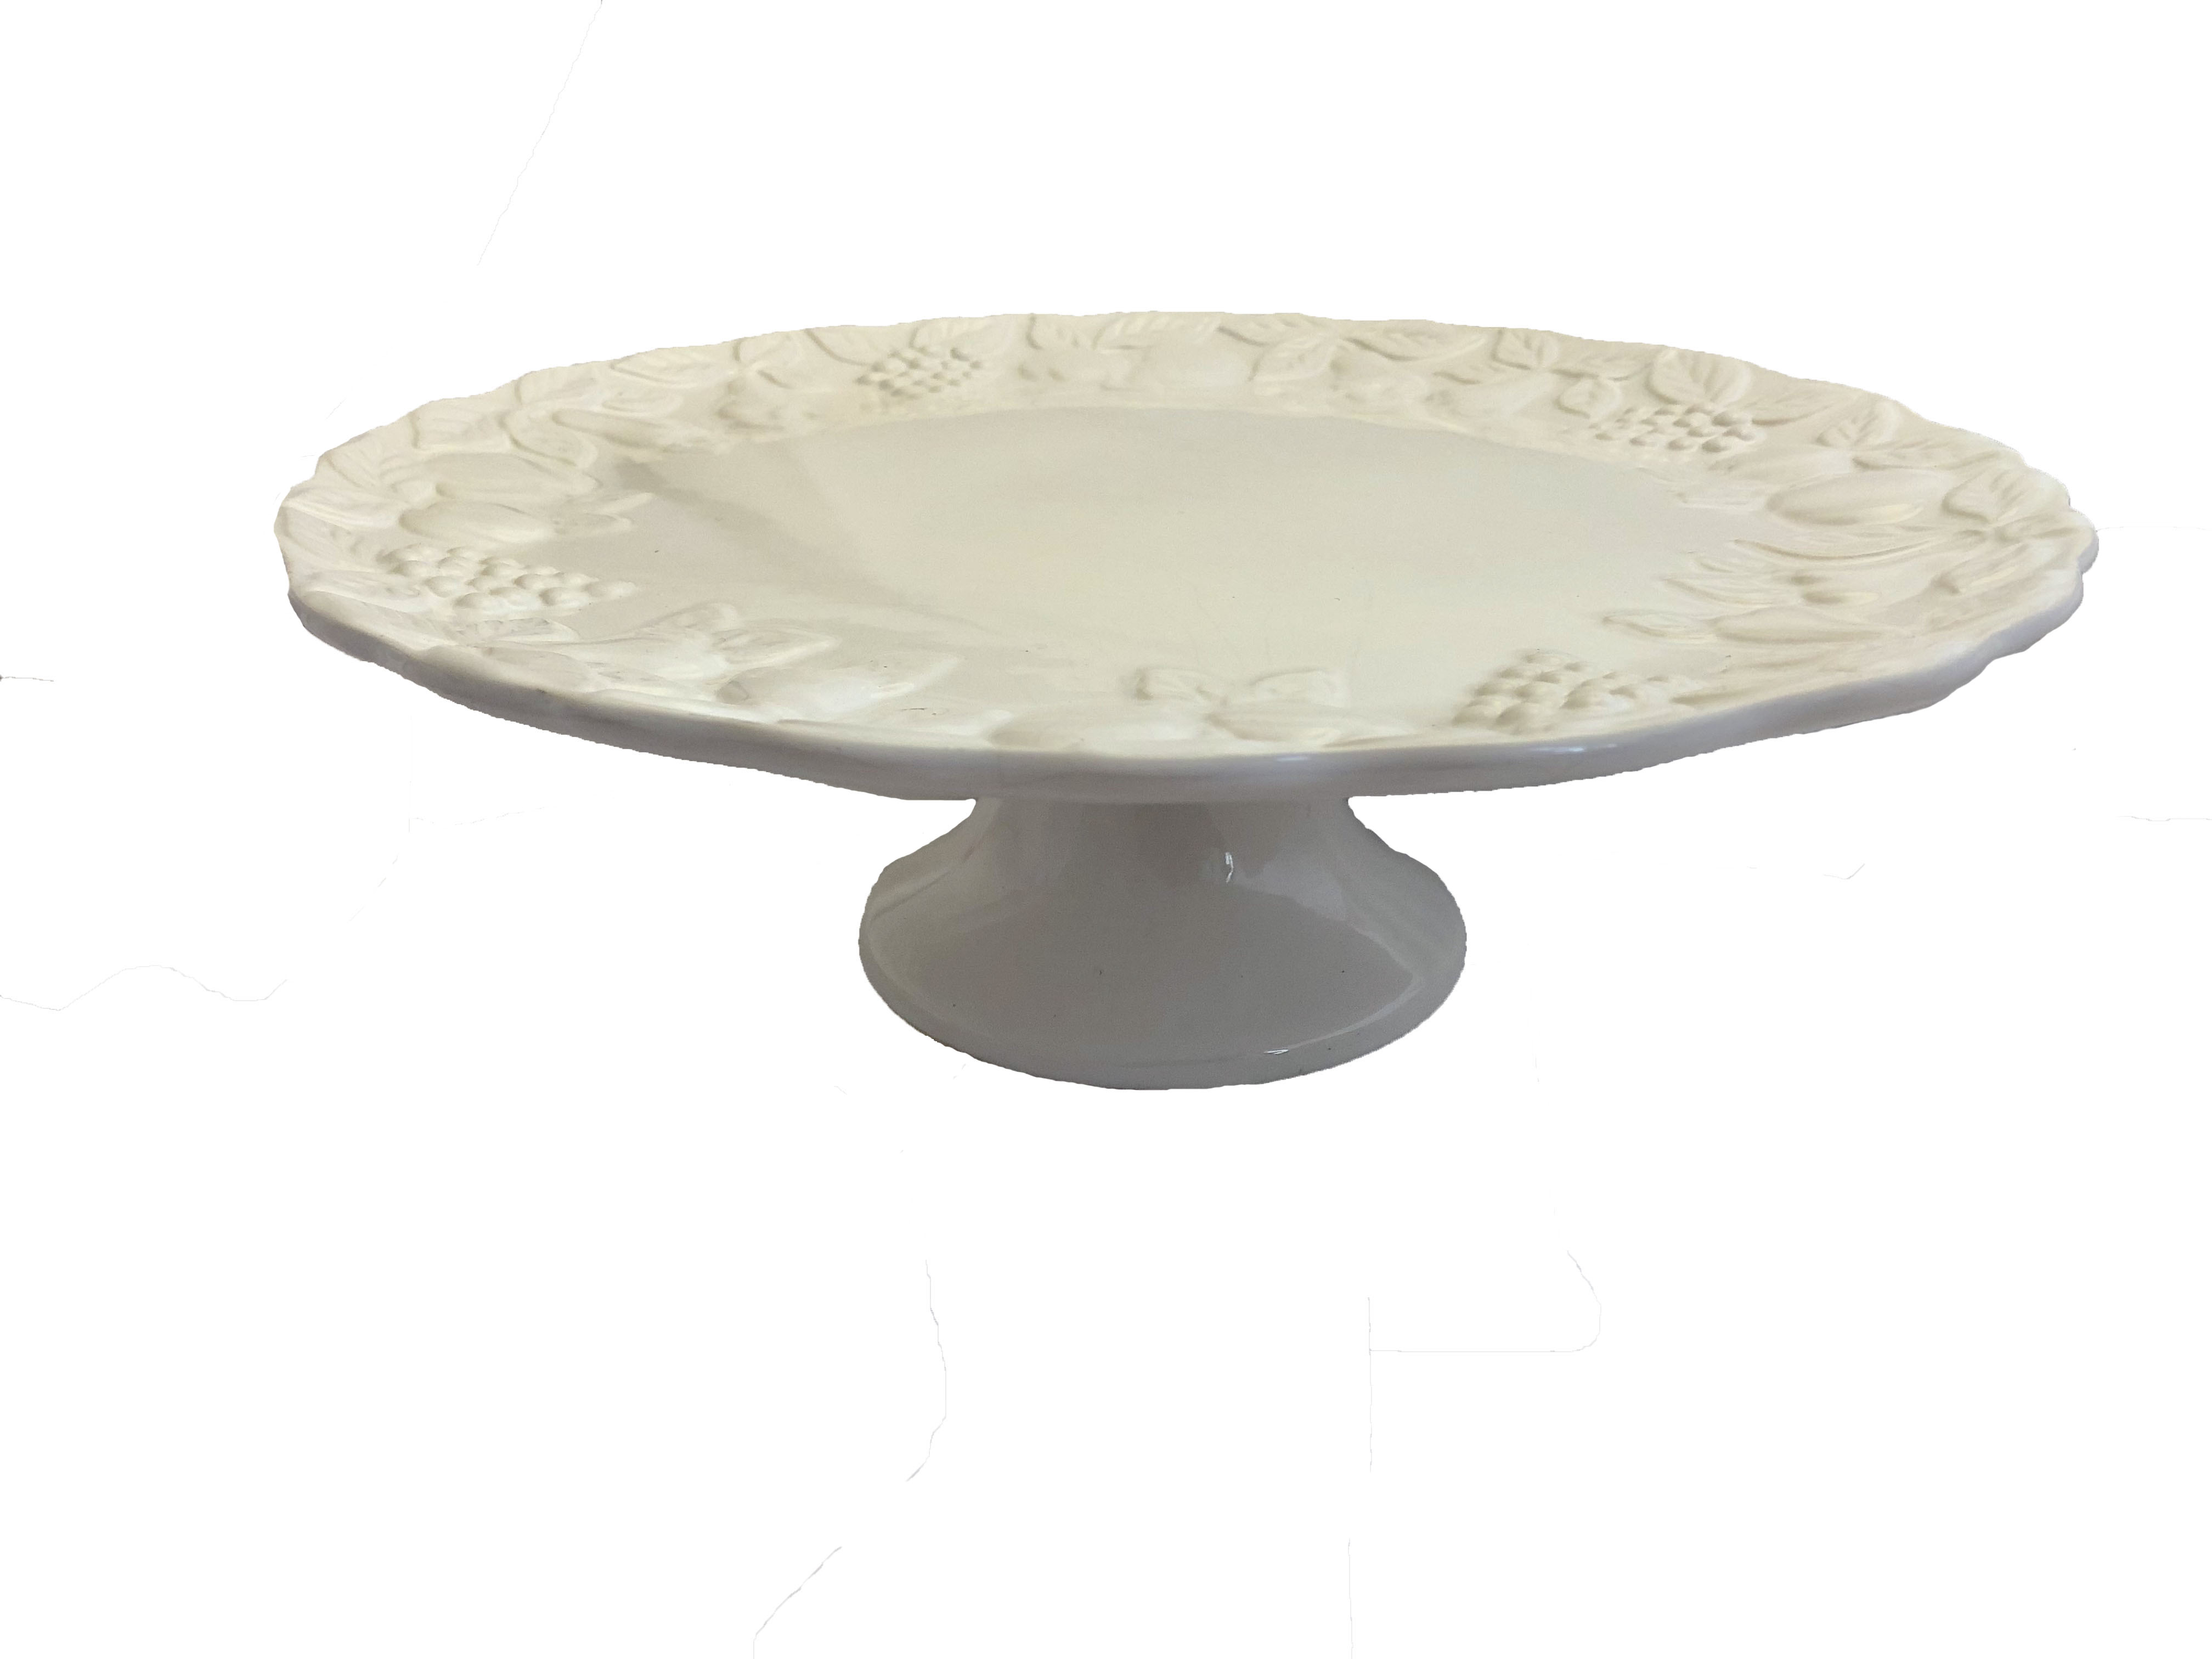 category_T1002 - White China Cake Stand Pedestal